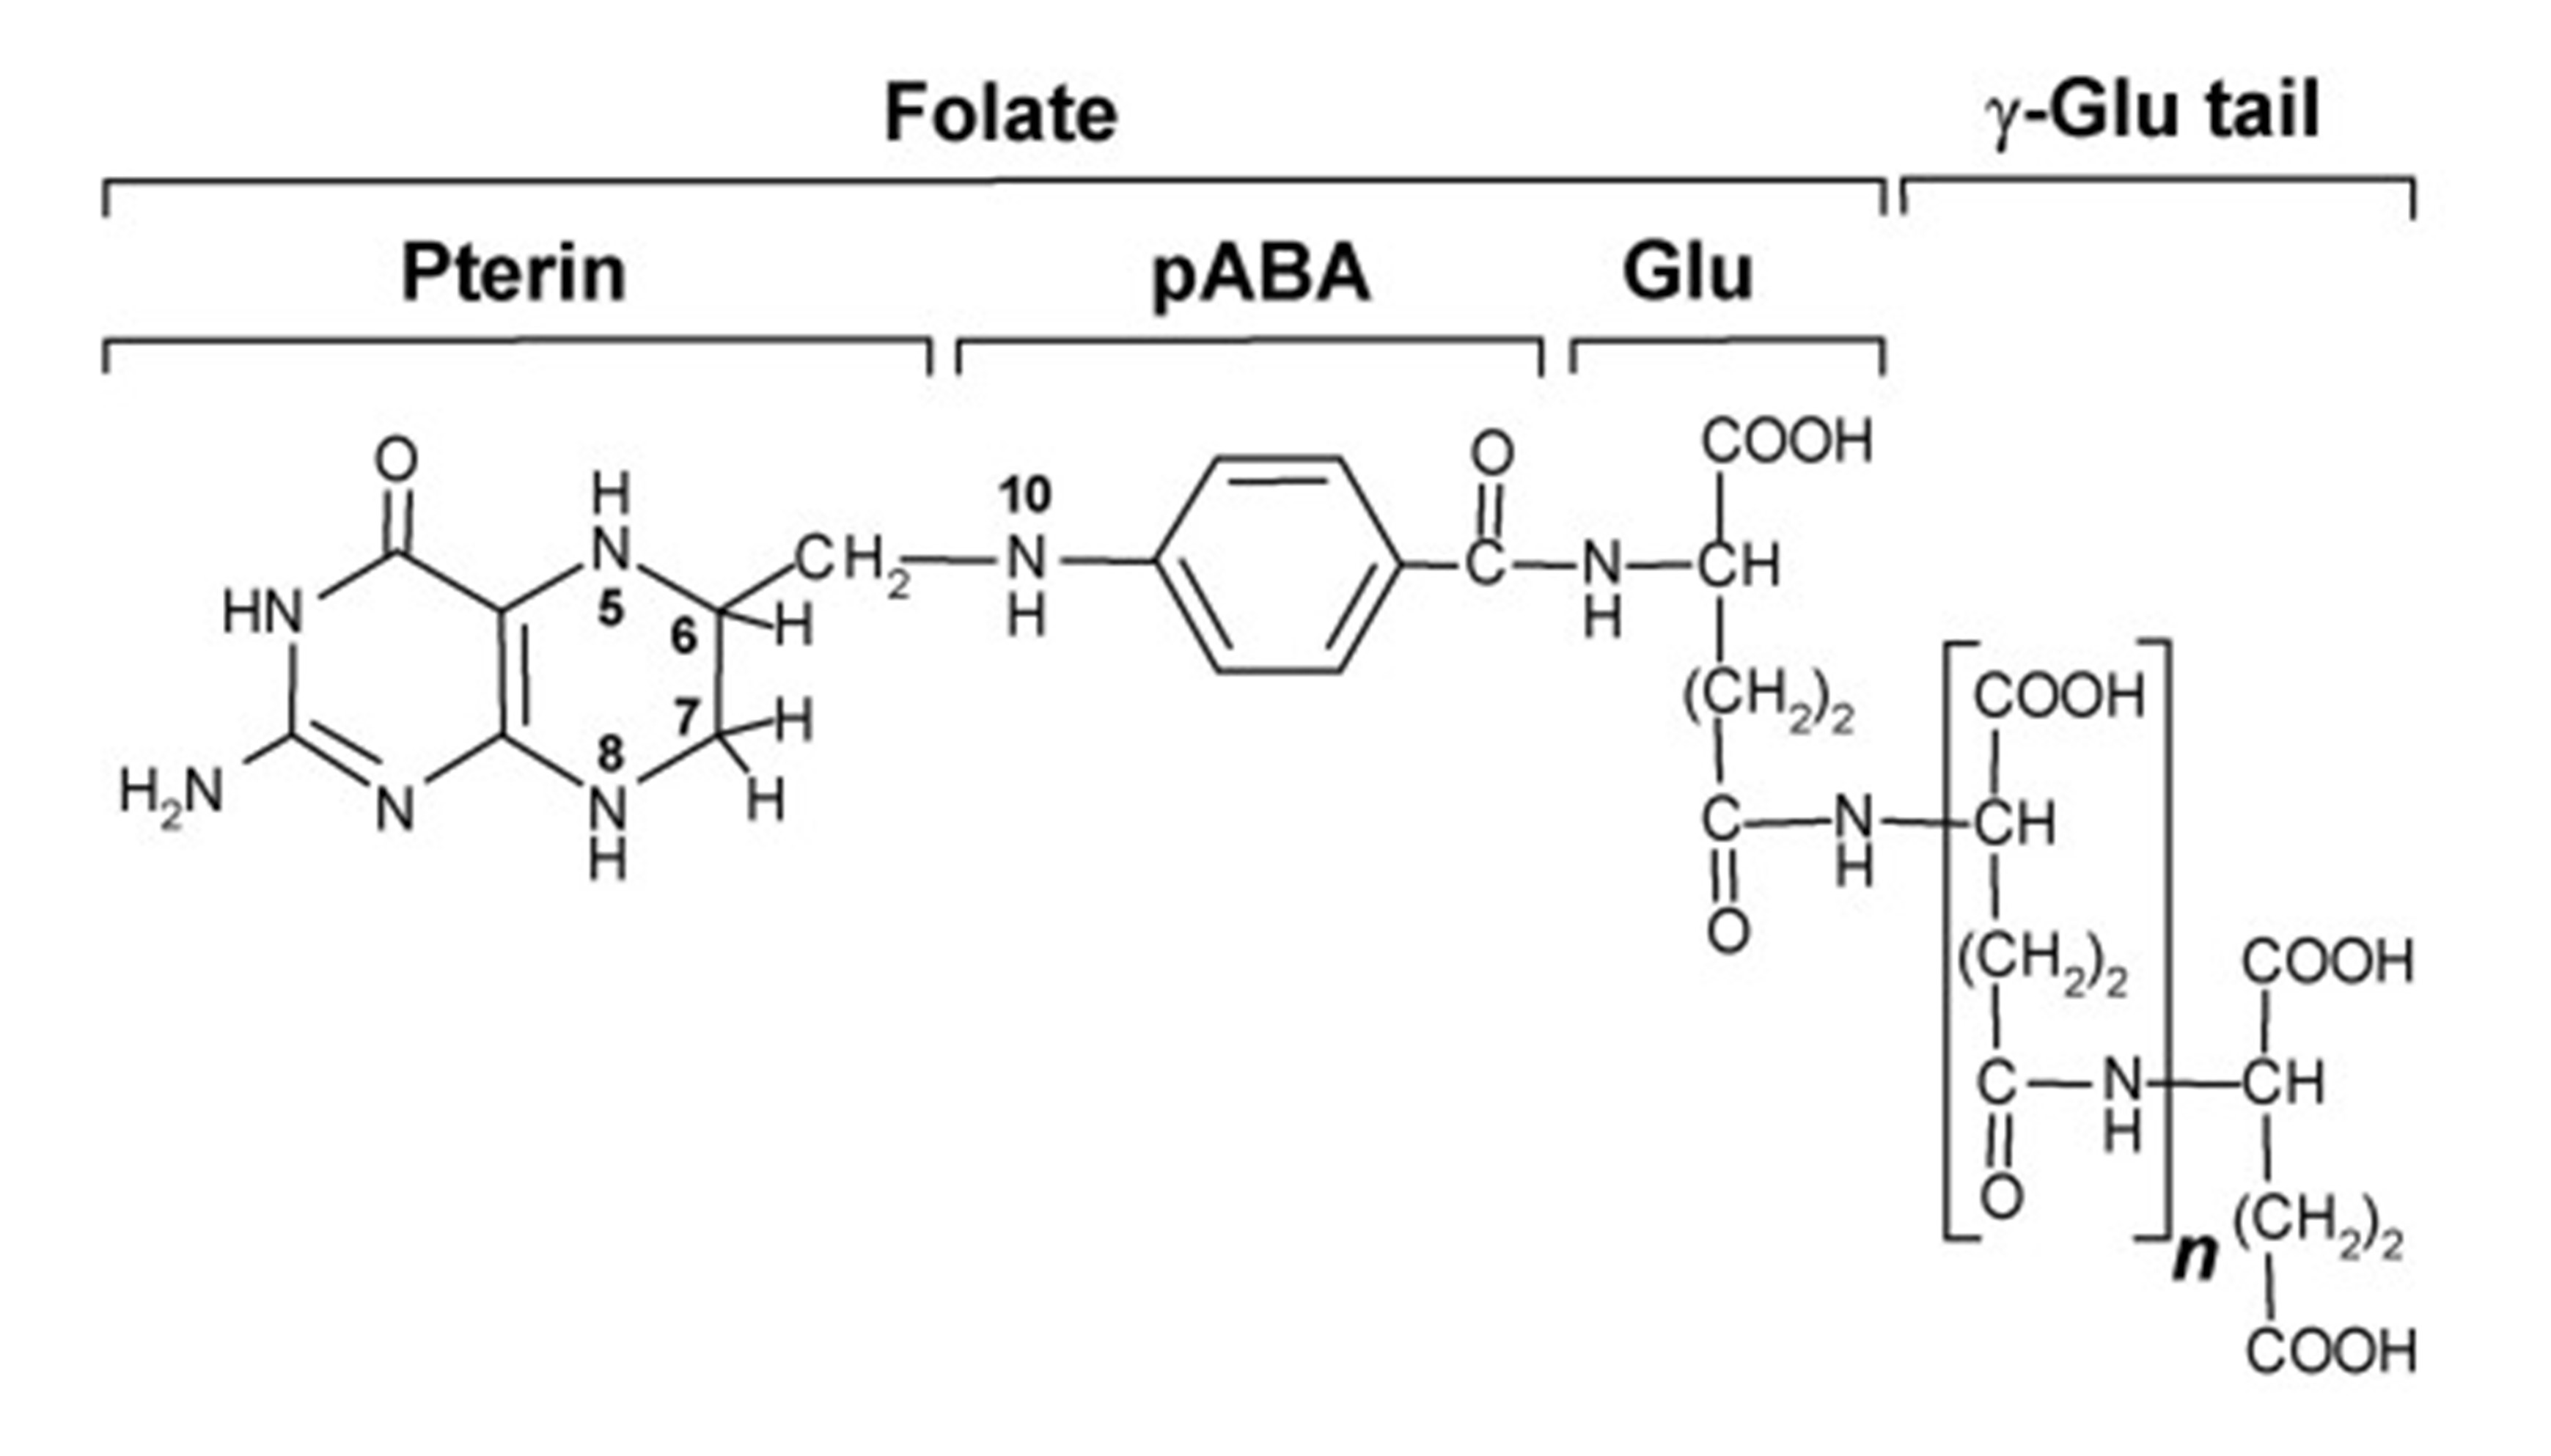 The structure of natural folate found in food, tetrahydrofolate (THF). Source: Crécy-Lagard et al. (2007). 